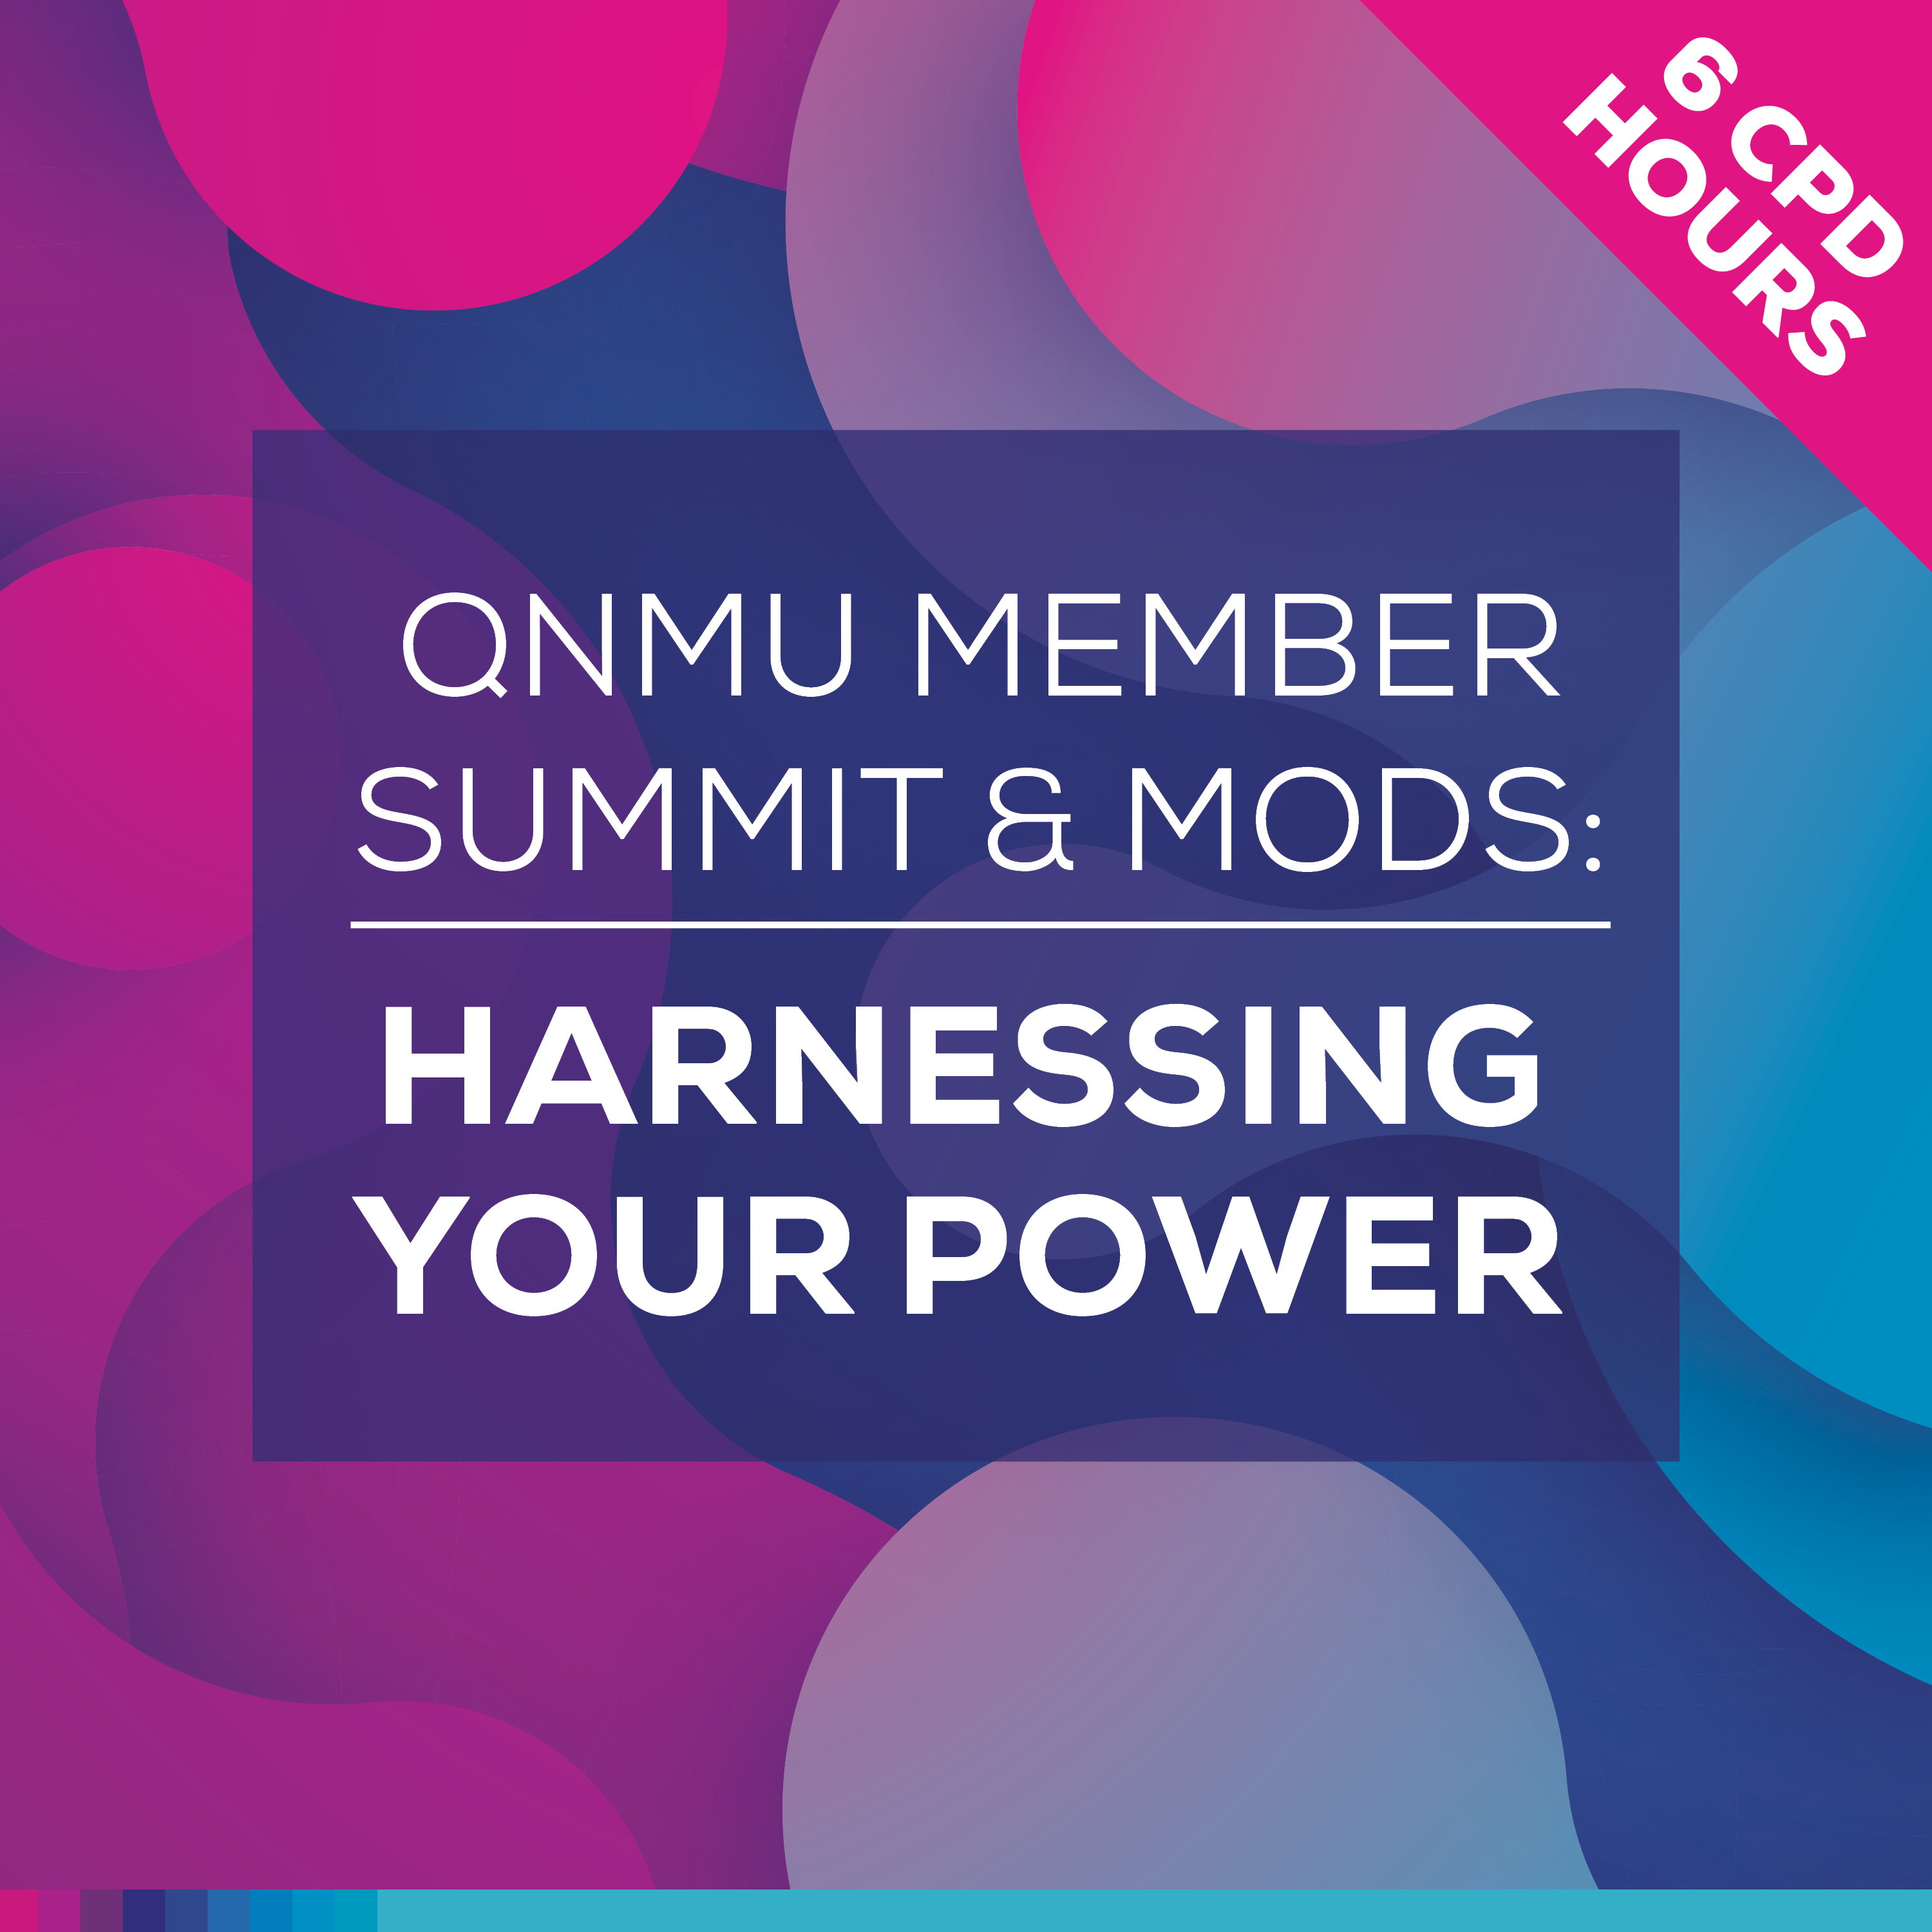 QNMU Member Summit & MoDs:  harnessing your power